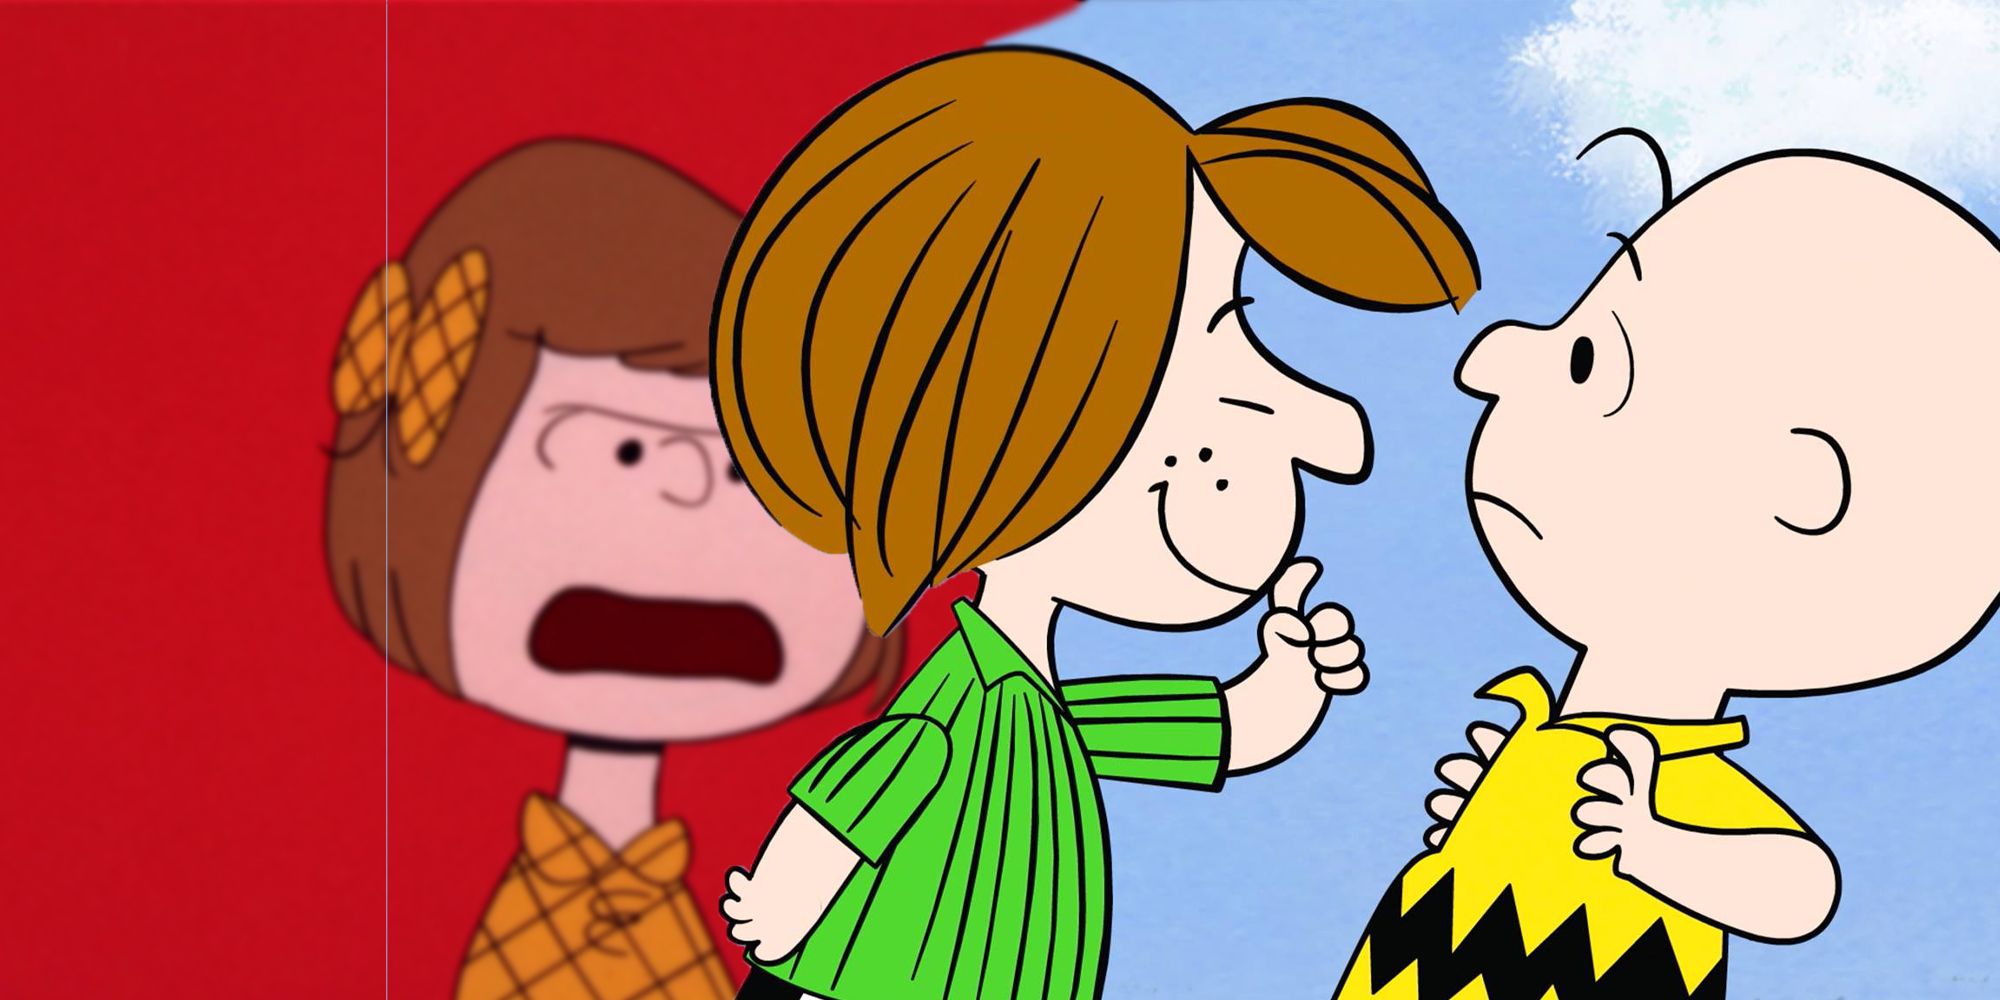 Featured Image: Peanuts, Patty angry in the background, with Peppermint Patty putting a finger to her lips in front of Charlie Brown